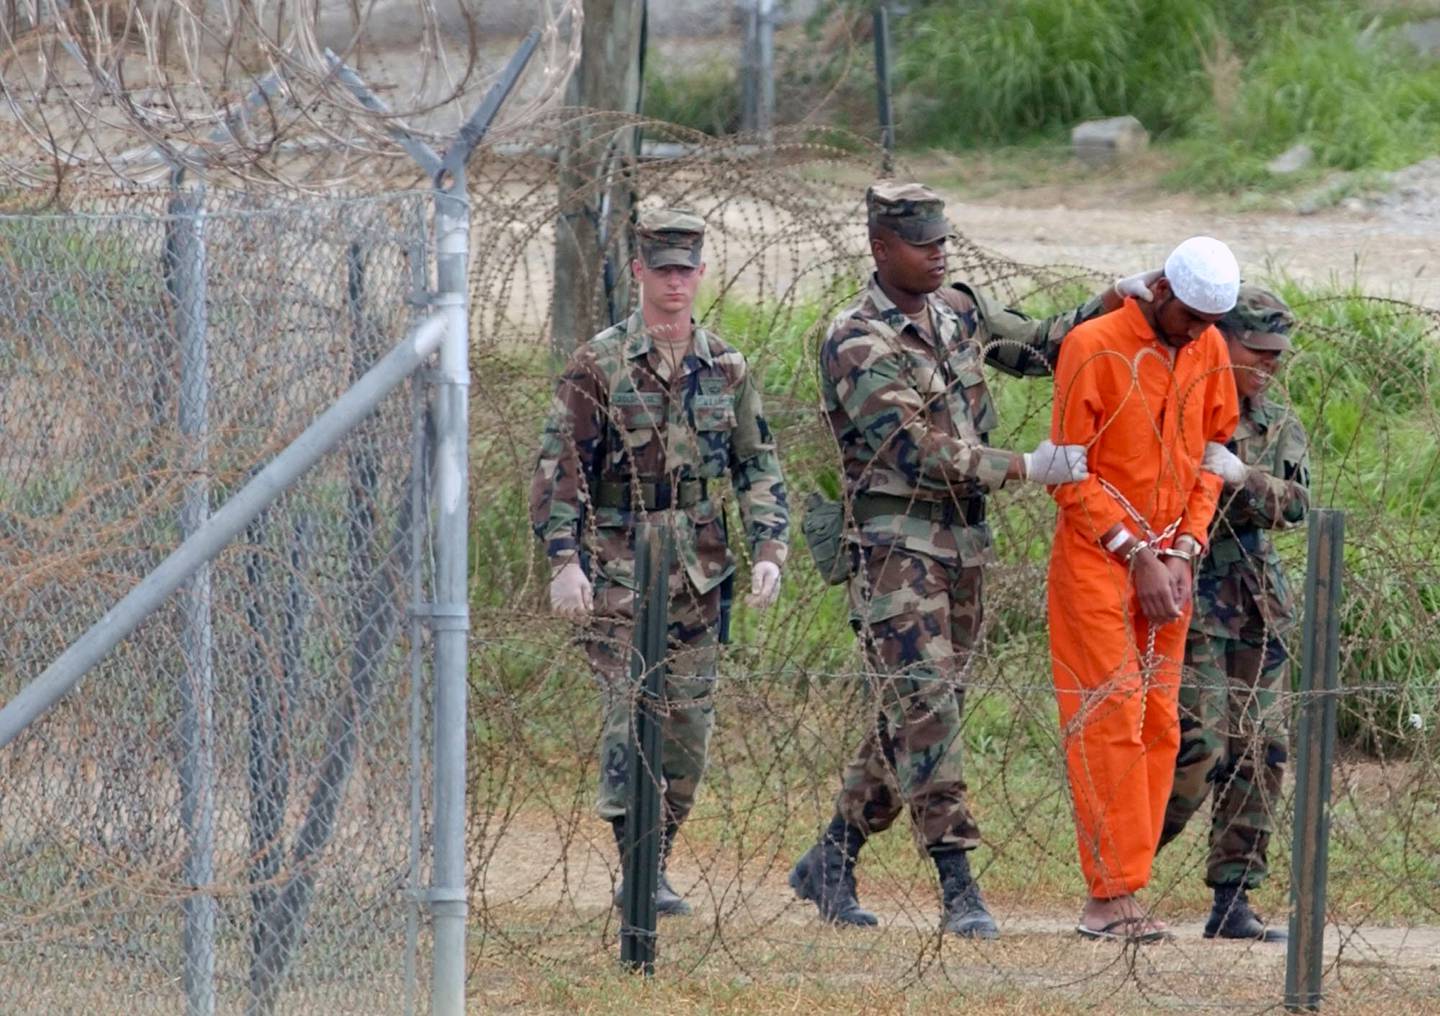 FILE - In this Feb. 6, 2002, file photo a detainee is led by military police to be interrogated by military officials at Camp X-Ray at the U.S. Naval Base at Guantanamo Bay, Cuba. At the time the image was taken there were 158 al-Qaida and Taliban prisoners being held at Camp X-Ray. The White House says it intends to shutter the prison on the U.S. base in Cuba, which opened in January 2002 and where most of the 39 men still held have never been charged with a crime. (AP Photo/Lynne Sladky, File)